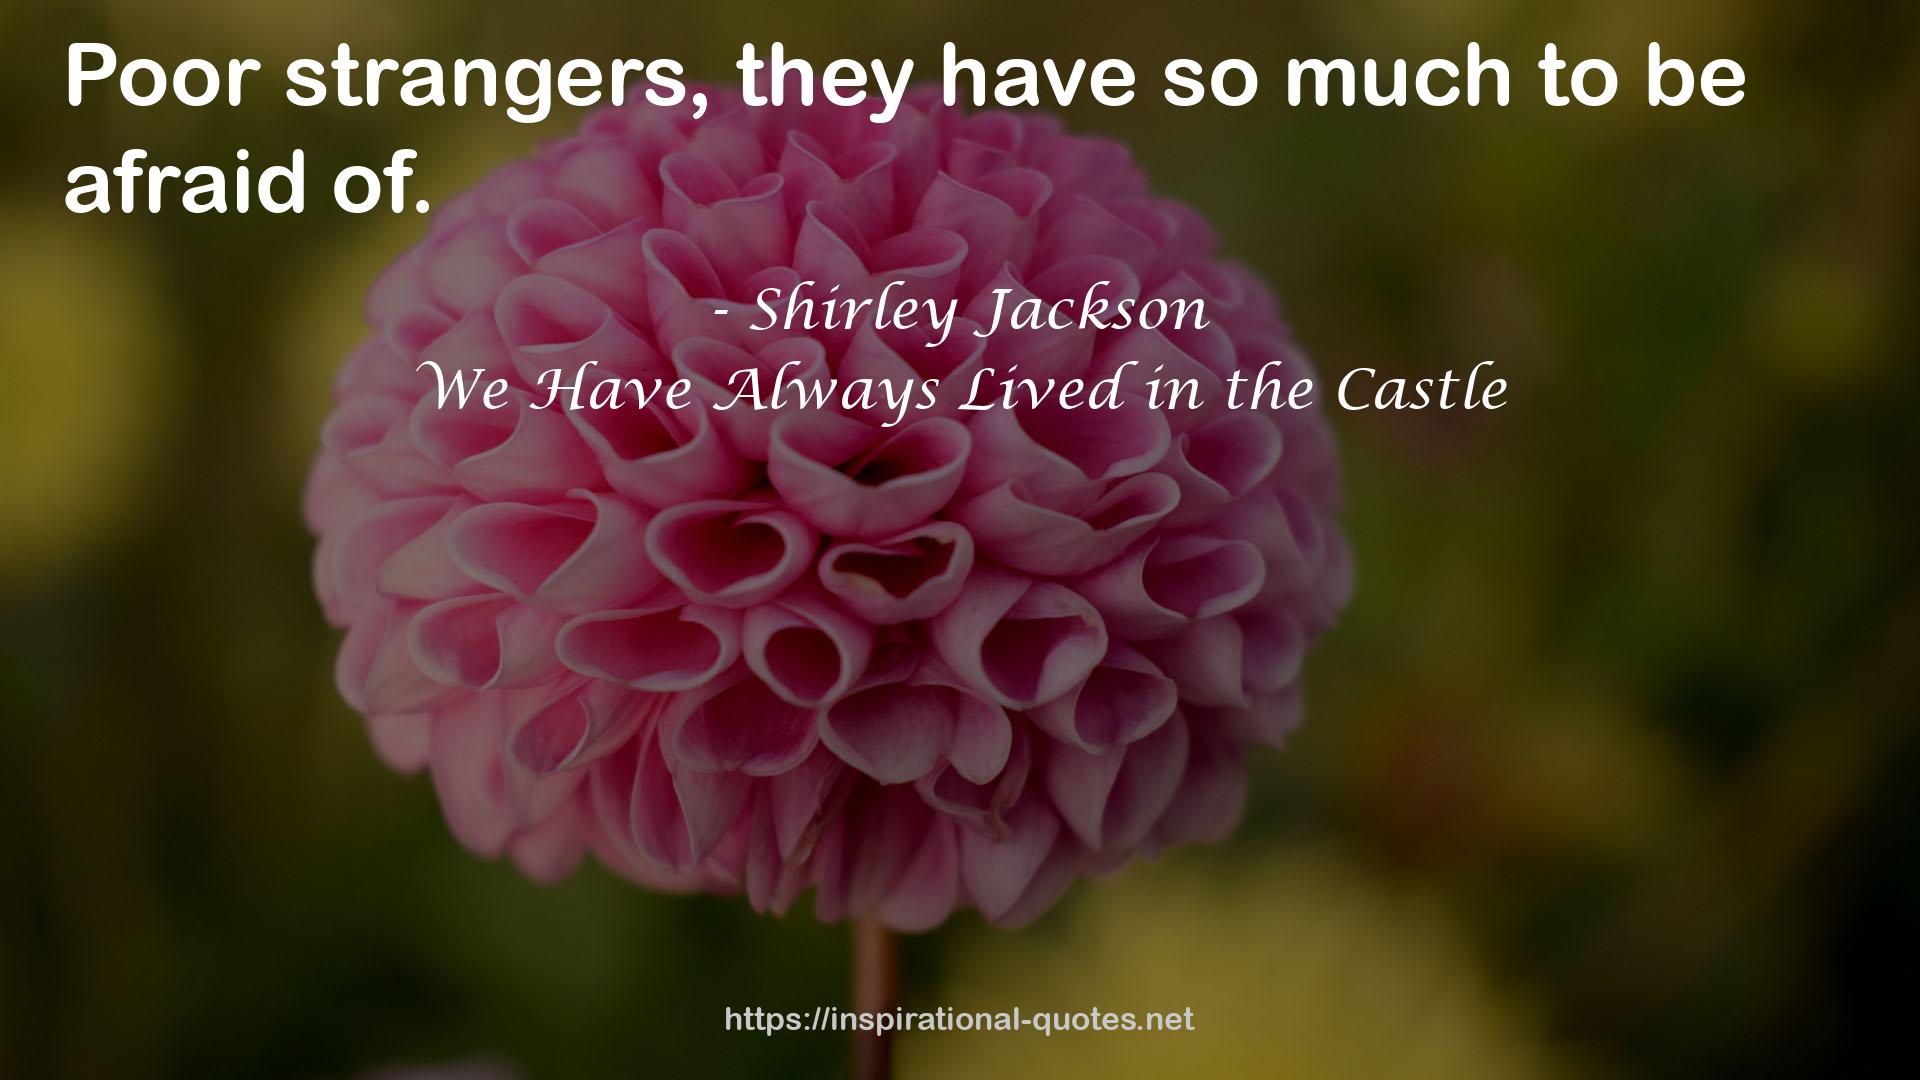 We Have Always Lived in the Castle QUOTES